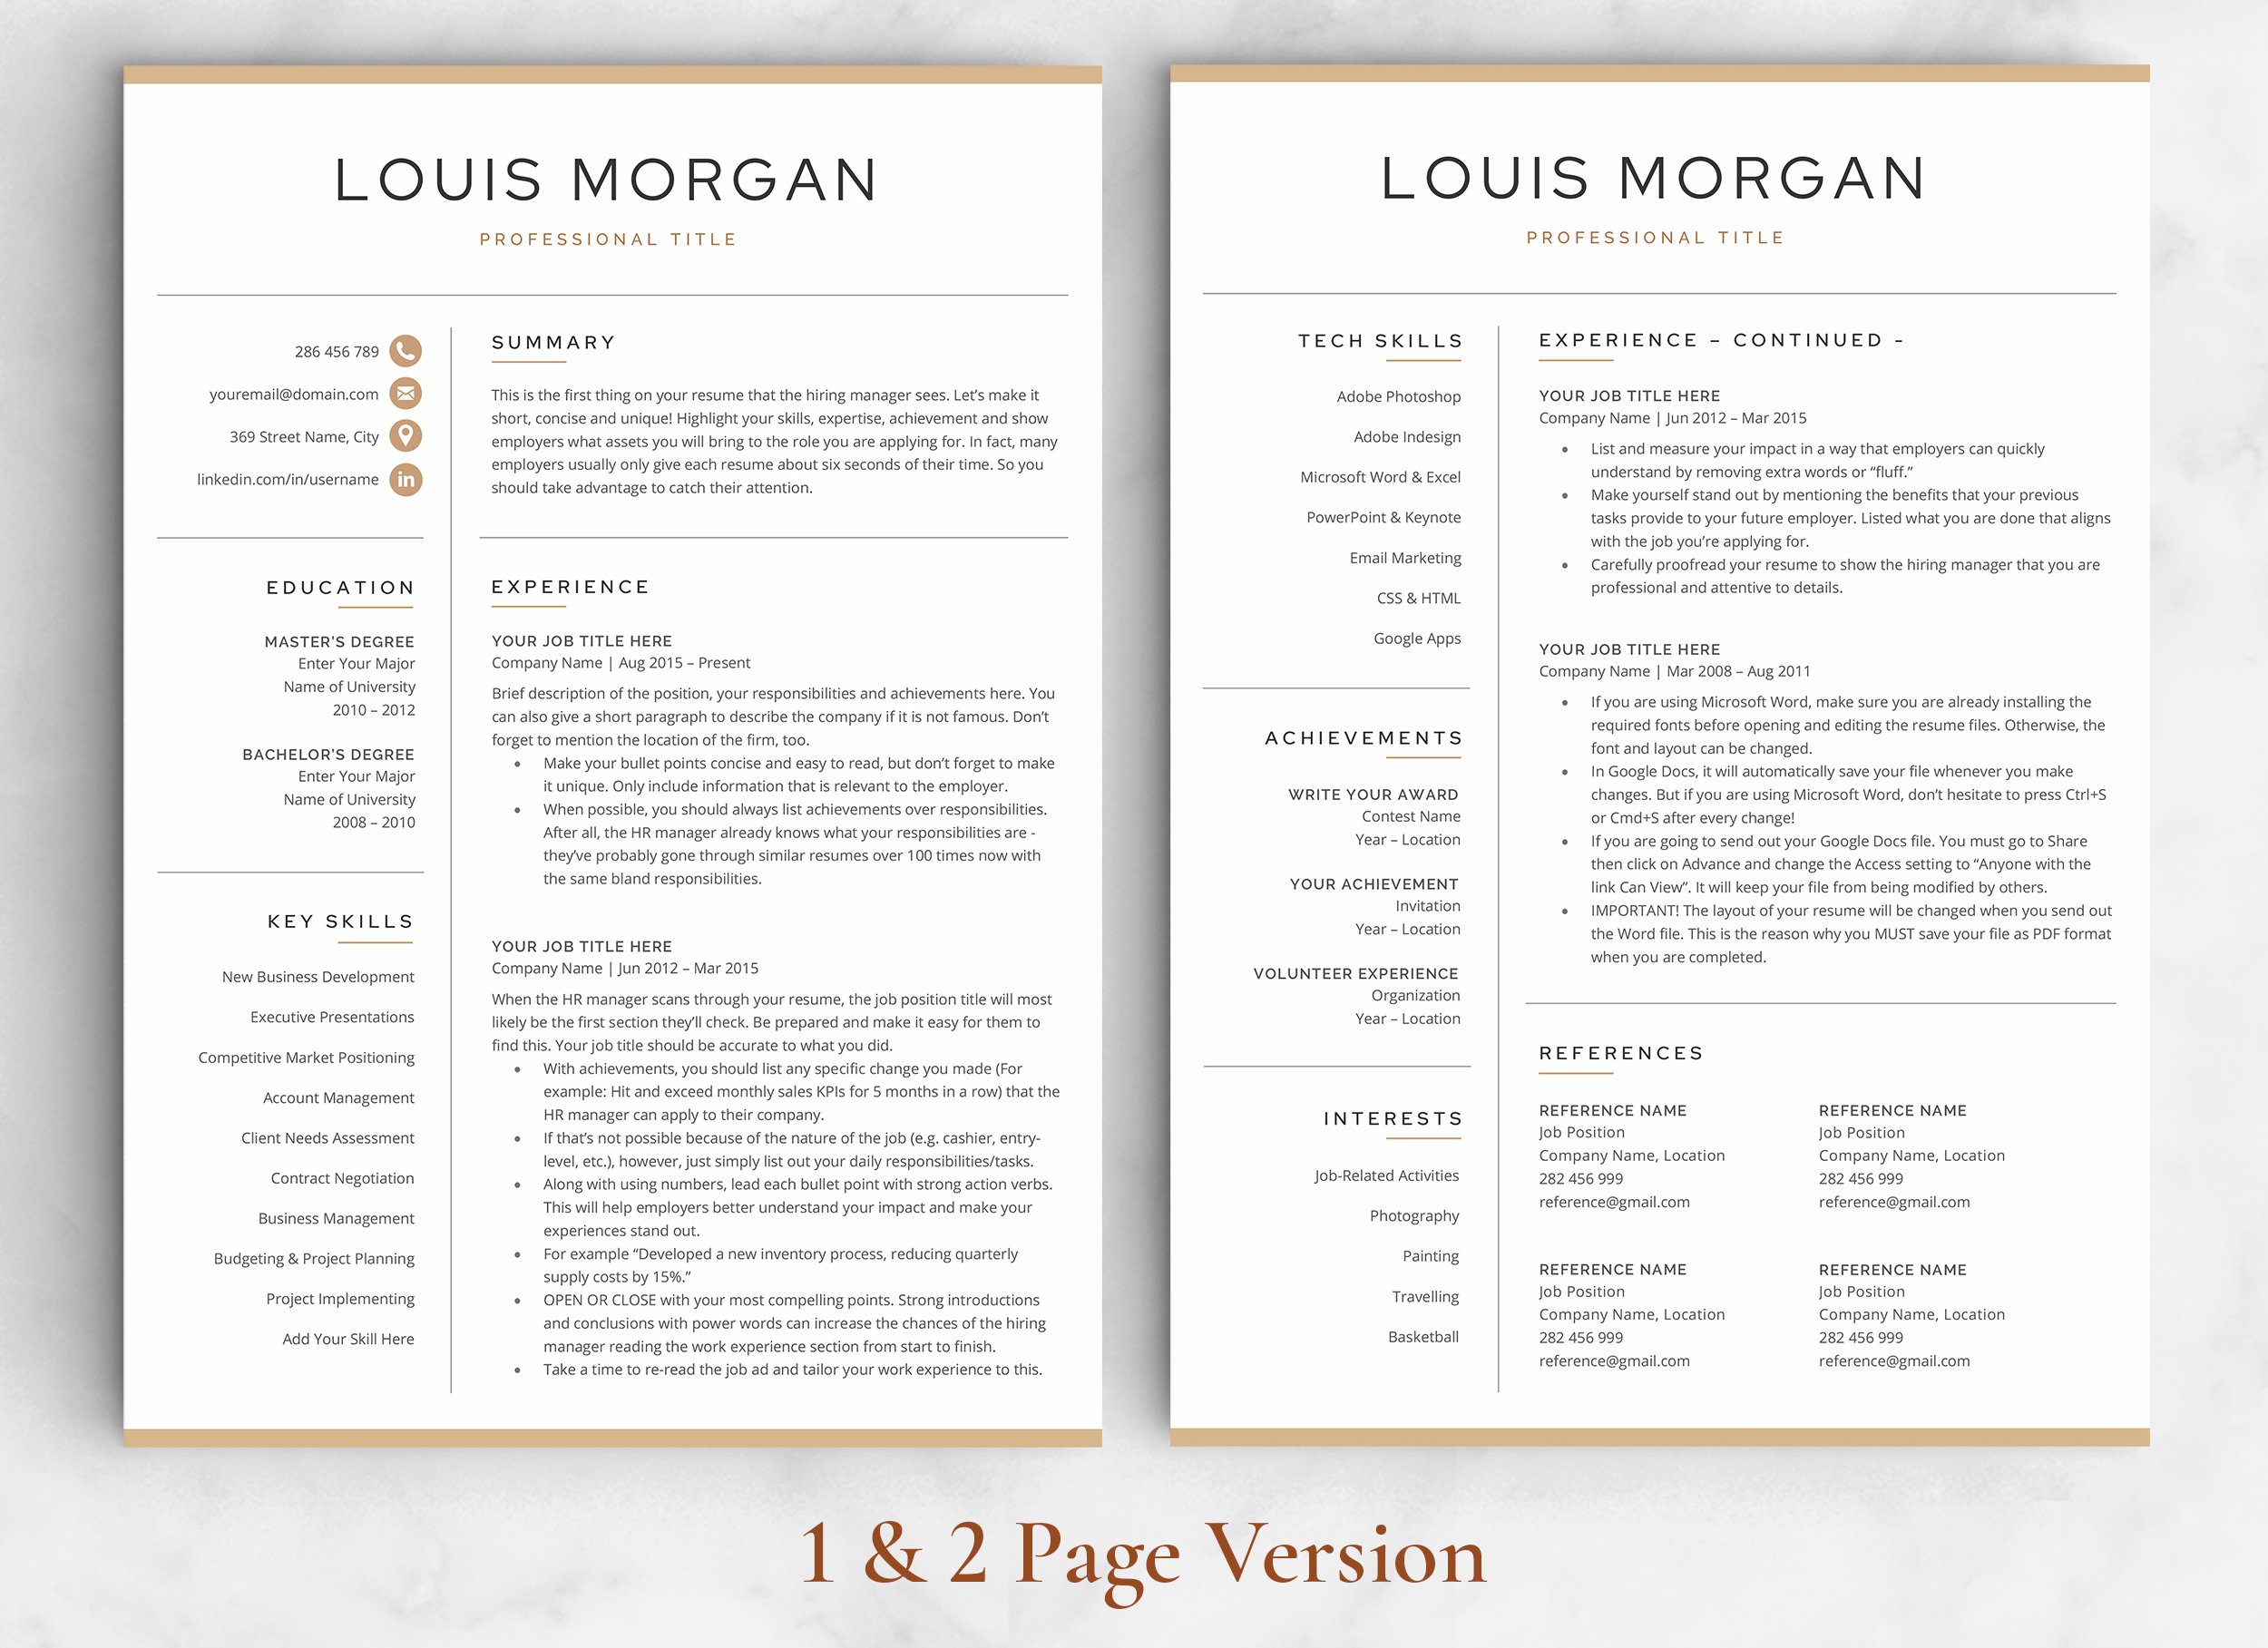 Professional resume template with a gold border.